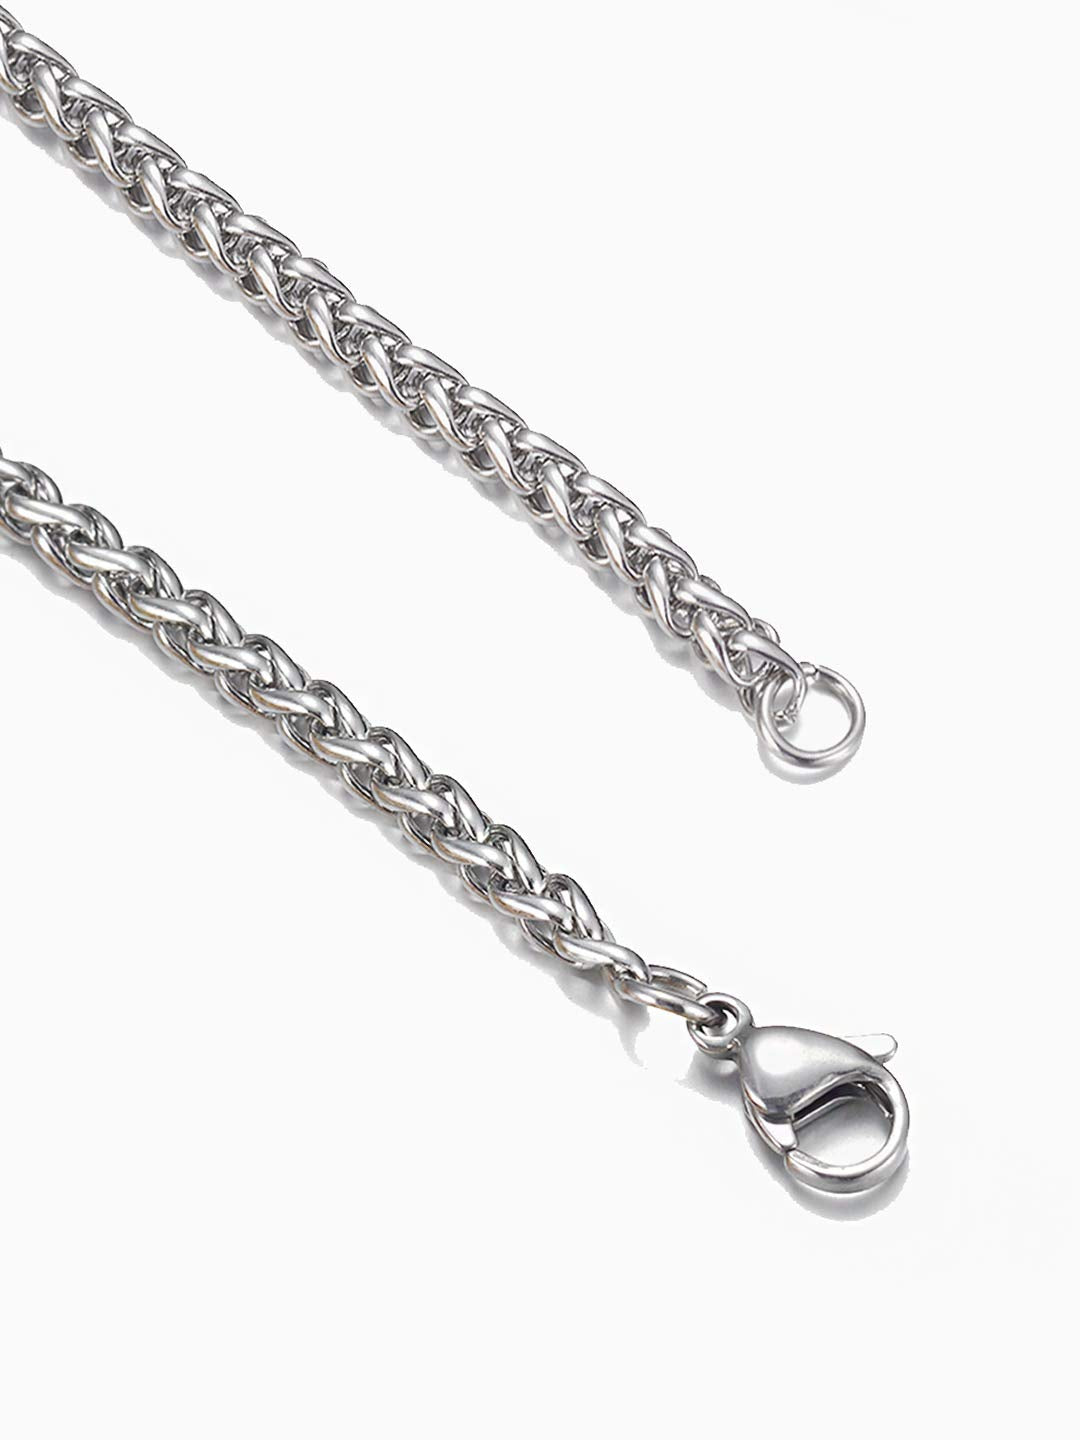 Yellow Chimes Chain for Men and Boys Silver Chain Men Crub Neck Chain for Men | Stainless Steel Chains for Men | Birthday Gift for Men & Boys Anniversary Gift for Husband